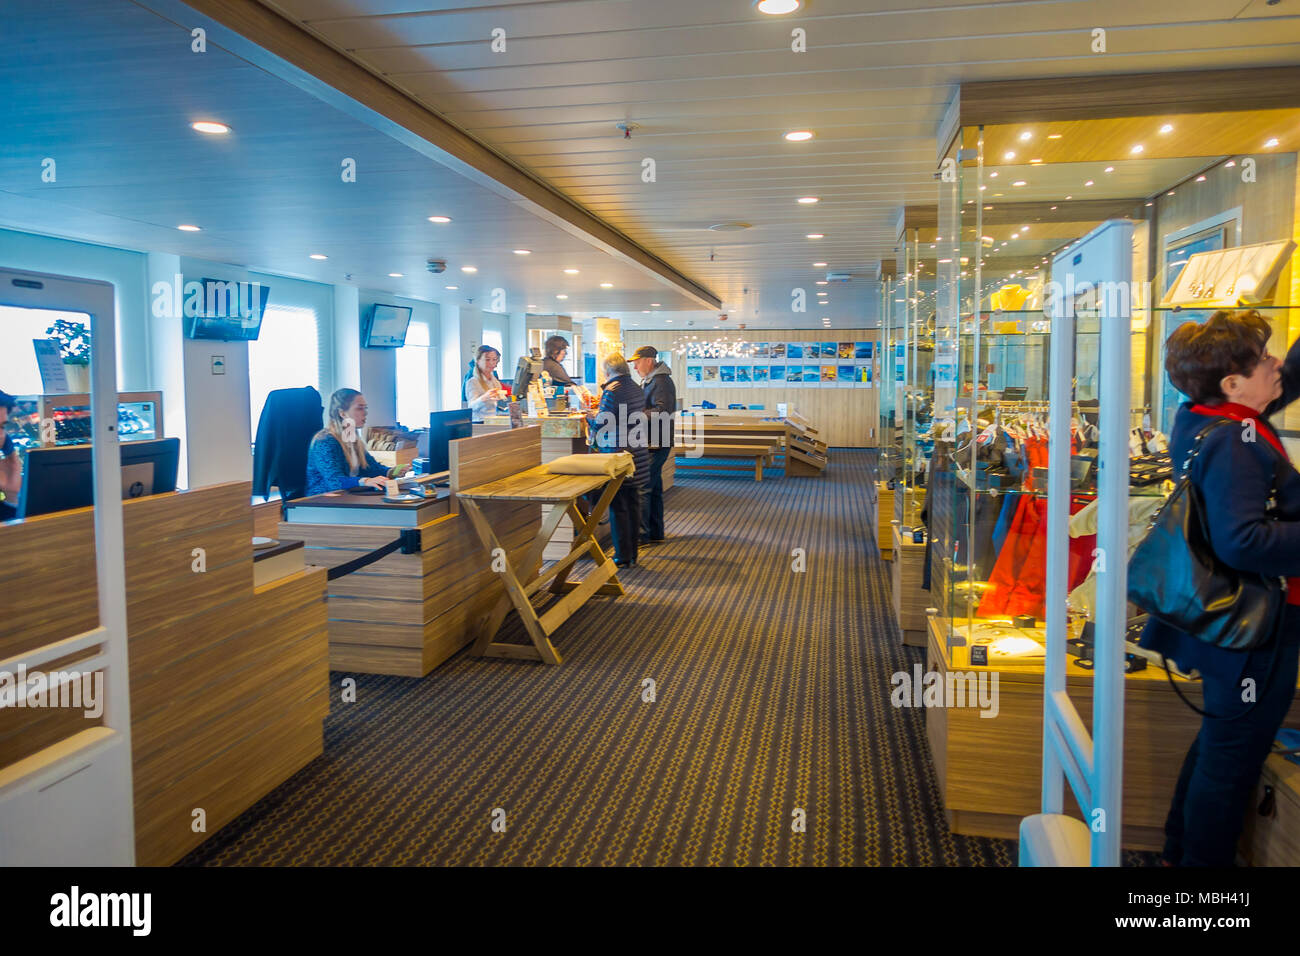 ALESUND, NORWAY - APRIL 04, 2018: Indoor view of unidentified people inside of a small store in a KONG HARALD cruise Stock Photo